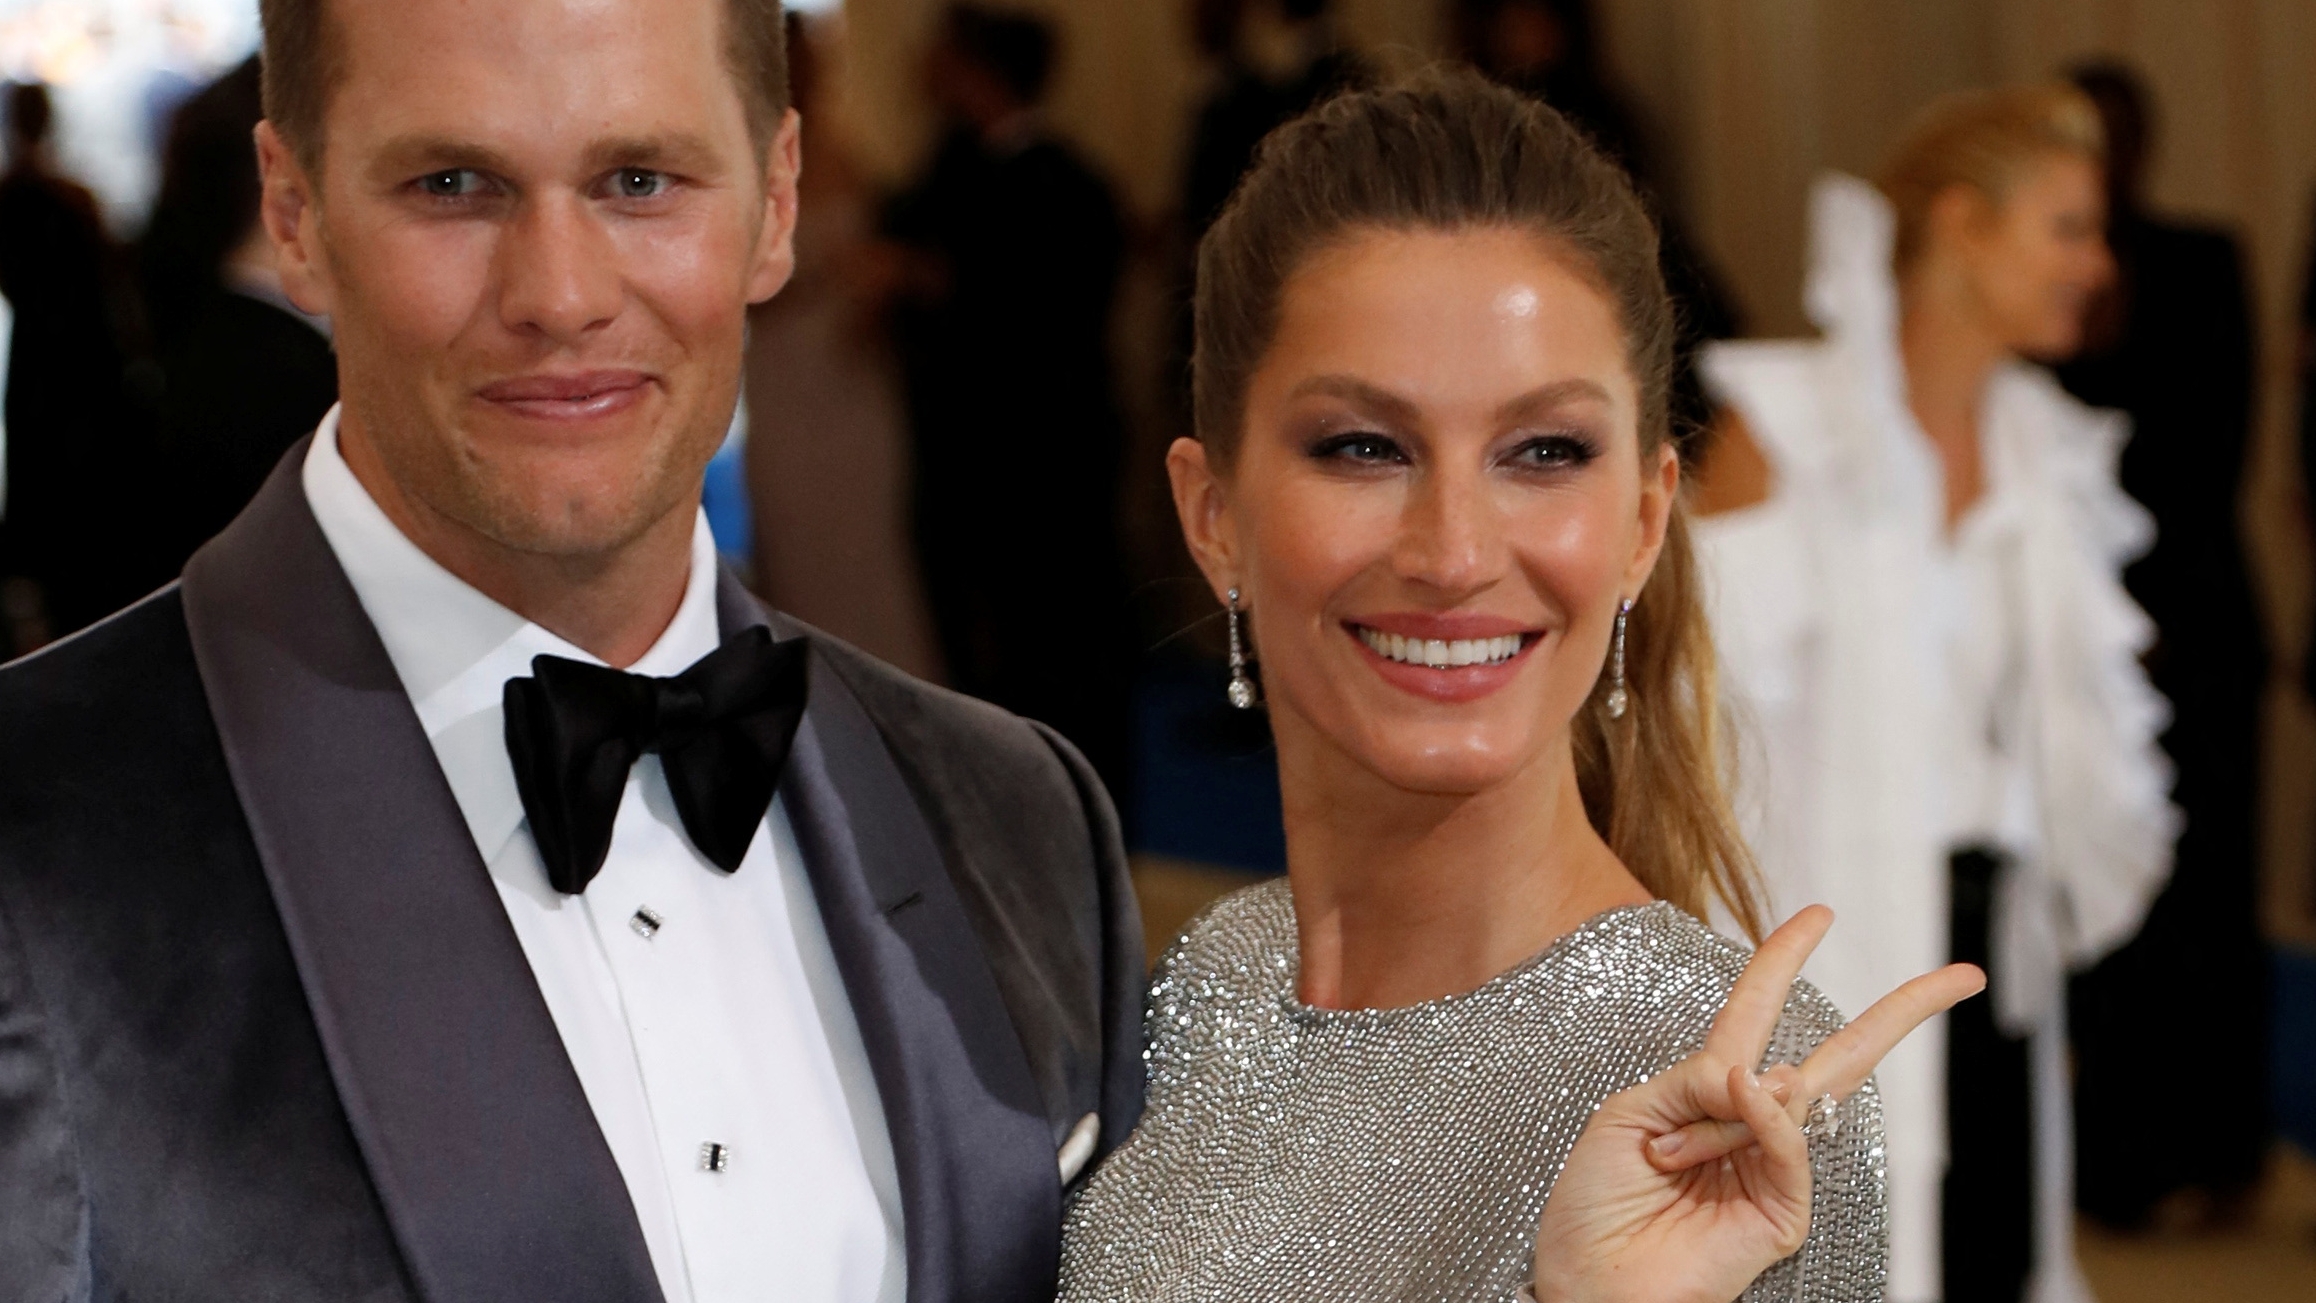 Gisele Bündchen and her ex-husband, American football star Tom Brady, had made heavy investments in FTX REUTERS/Lucas Jackson/File Photo